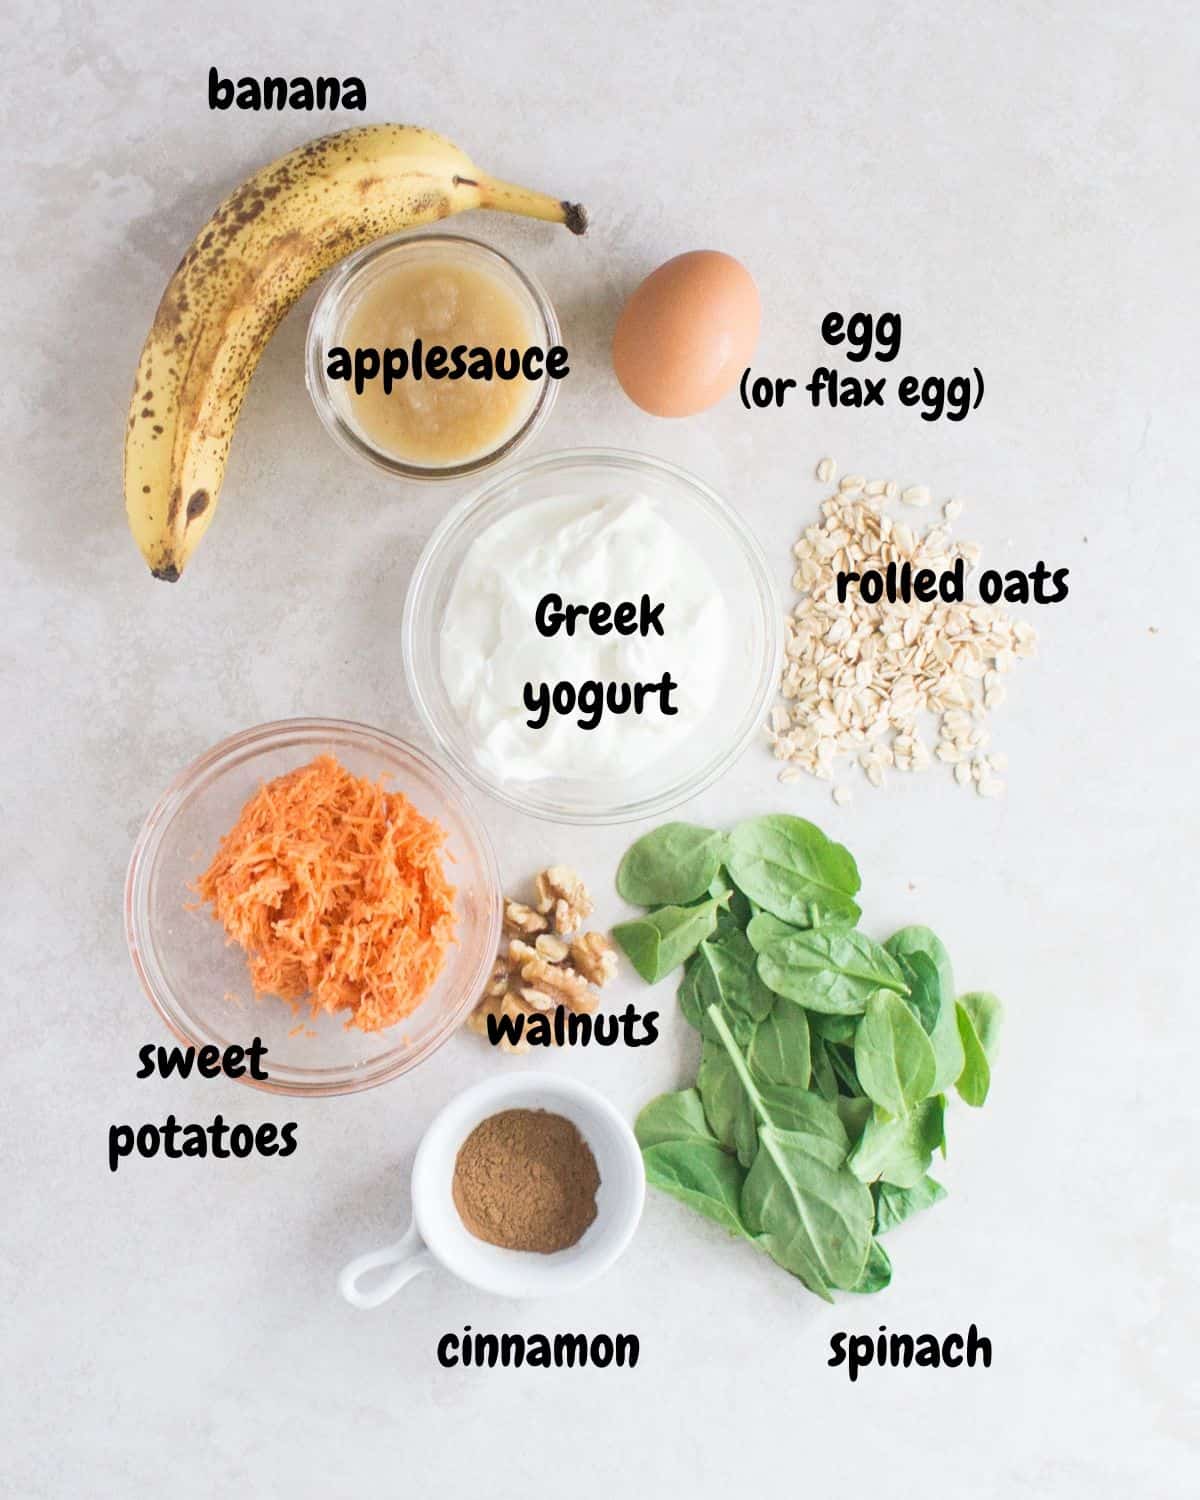 All the ingredients laid out on a white background and labelled.